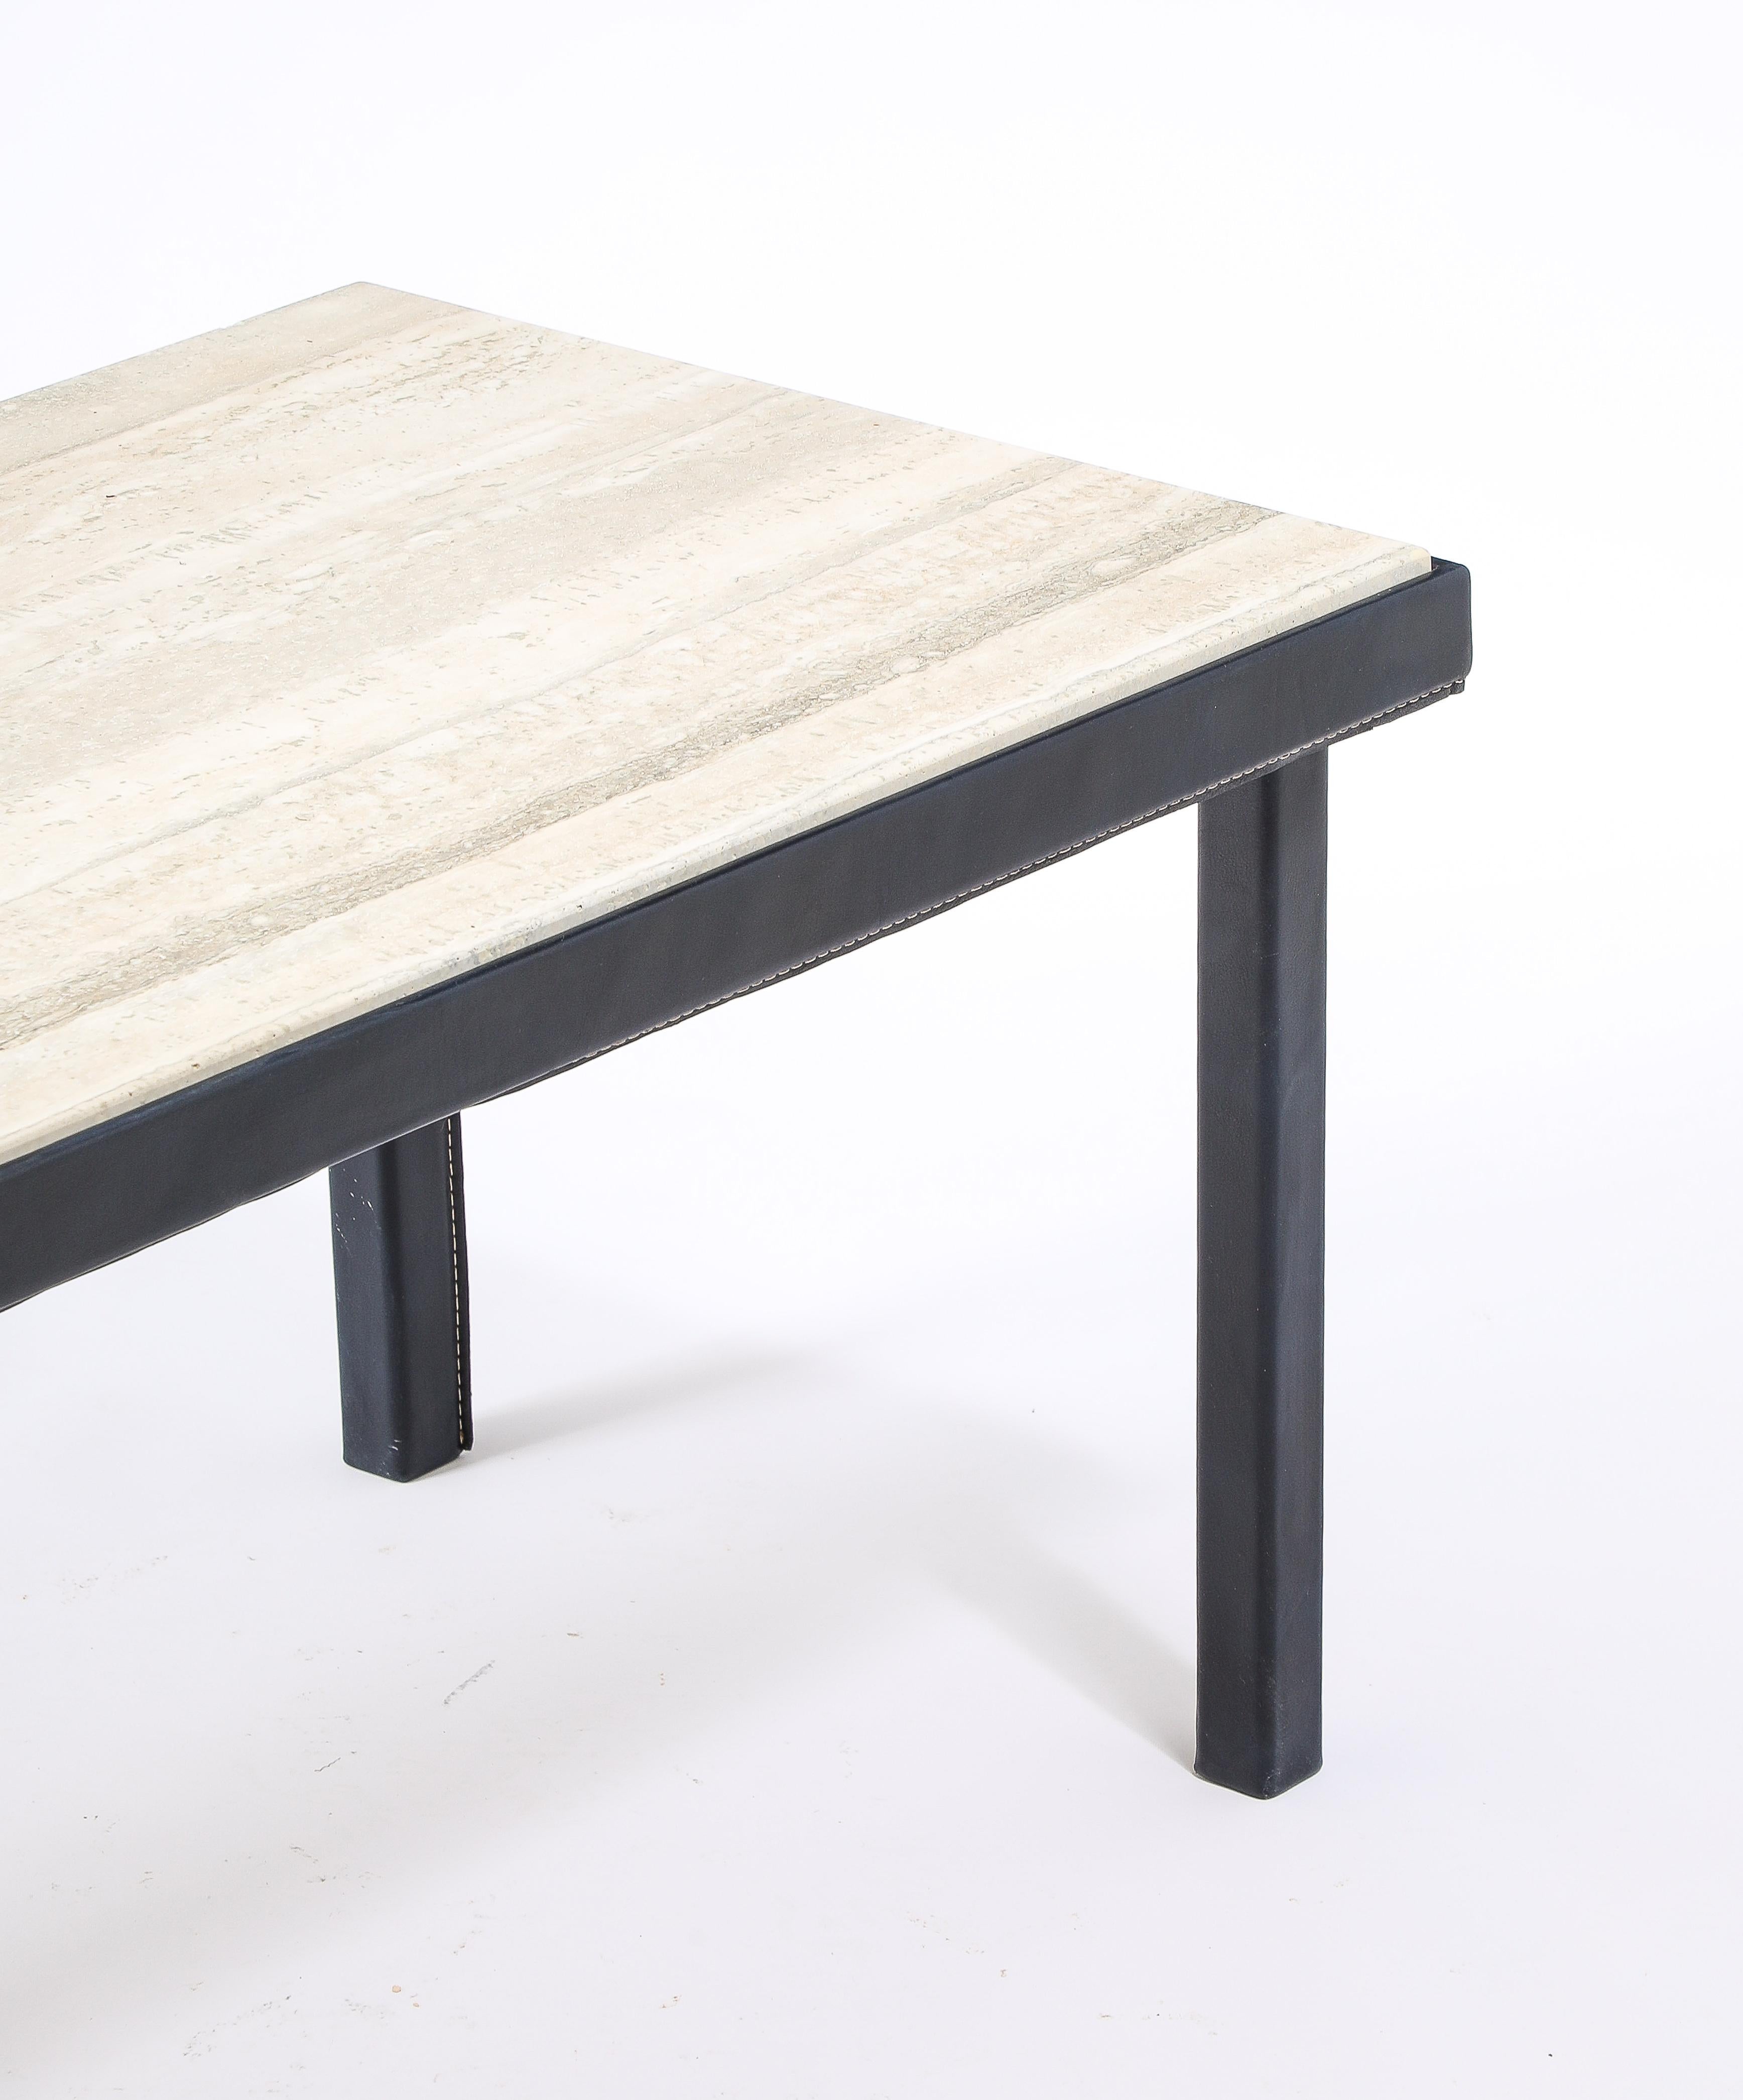 20th Century Jacques Adnet Stitched Blue Leather & Travertine Coffee Table, France 1950's For Sale